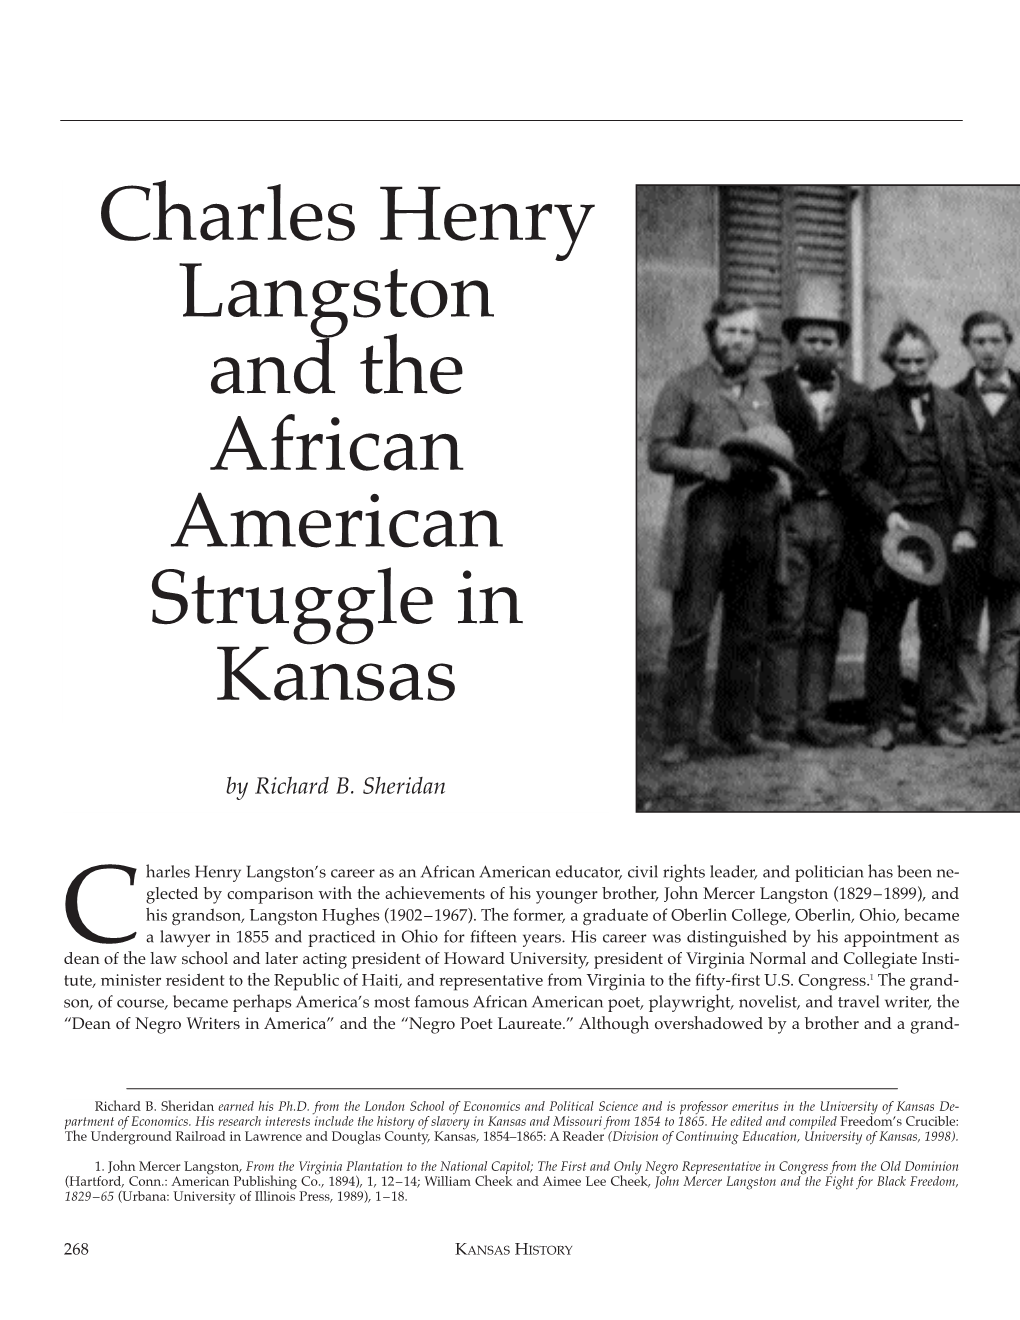 Charles Henry Langston and the African American Struggle in Kansas by Richard B